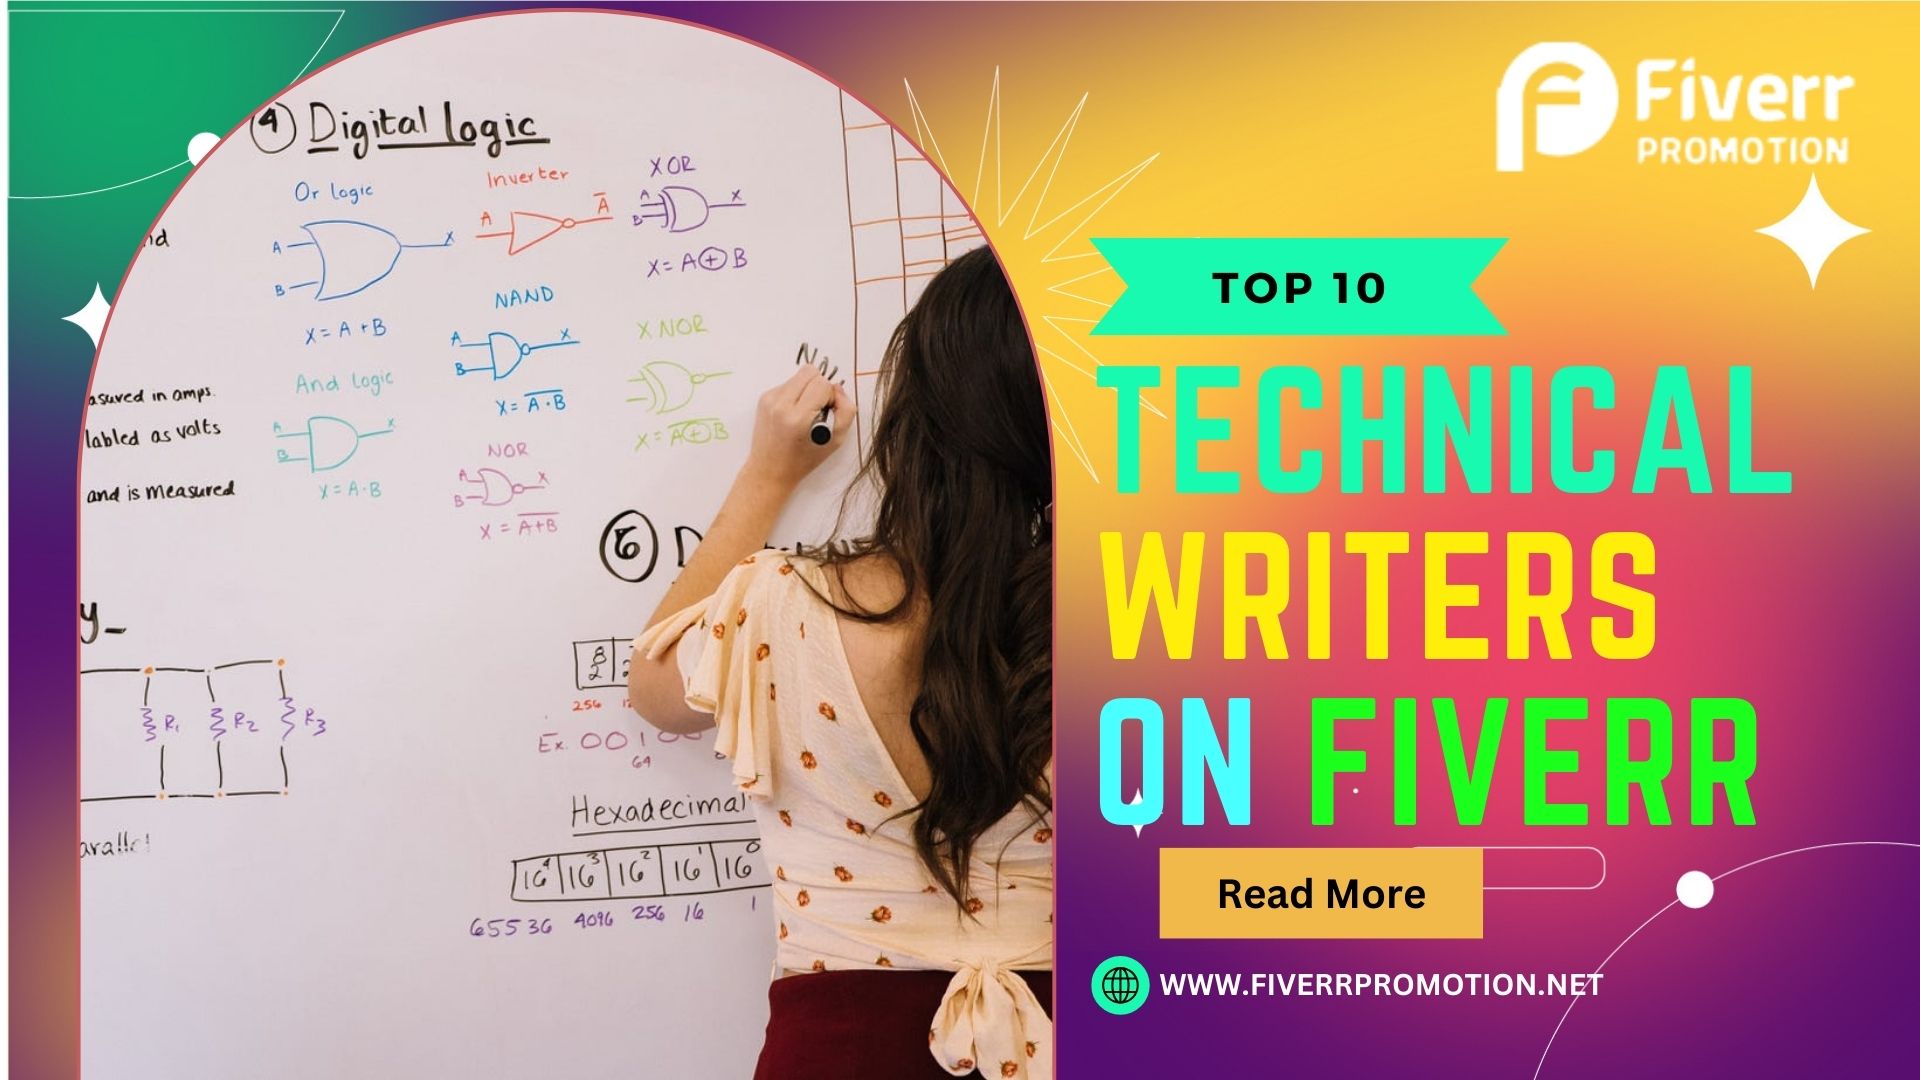 Top 10 Technical Writers on Fiverr